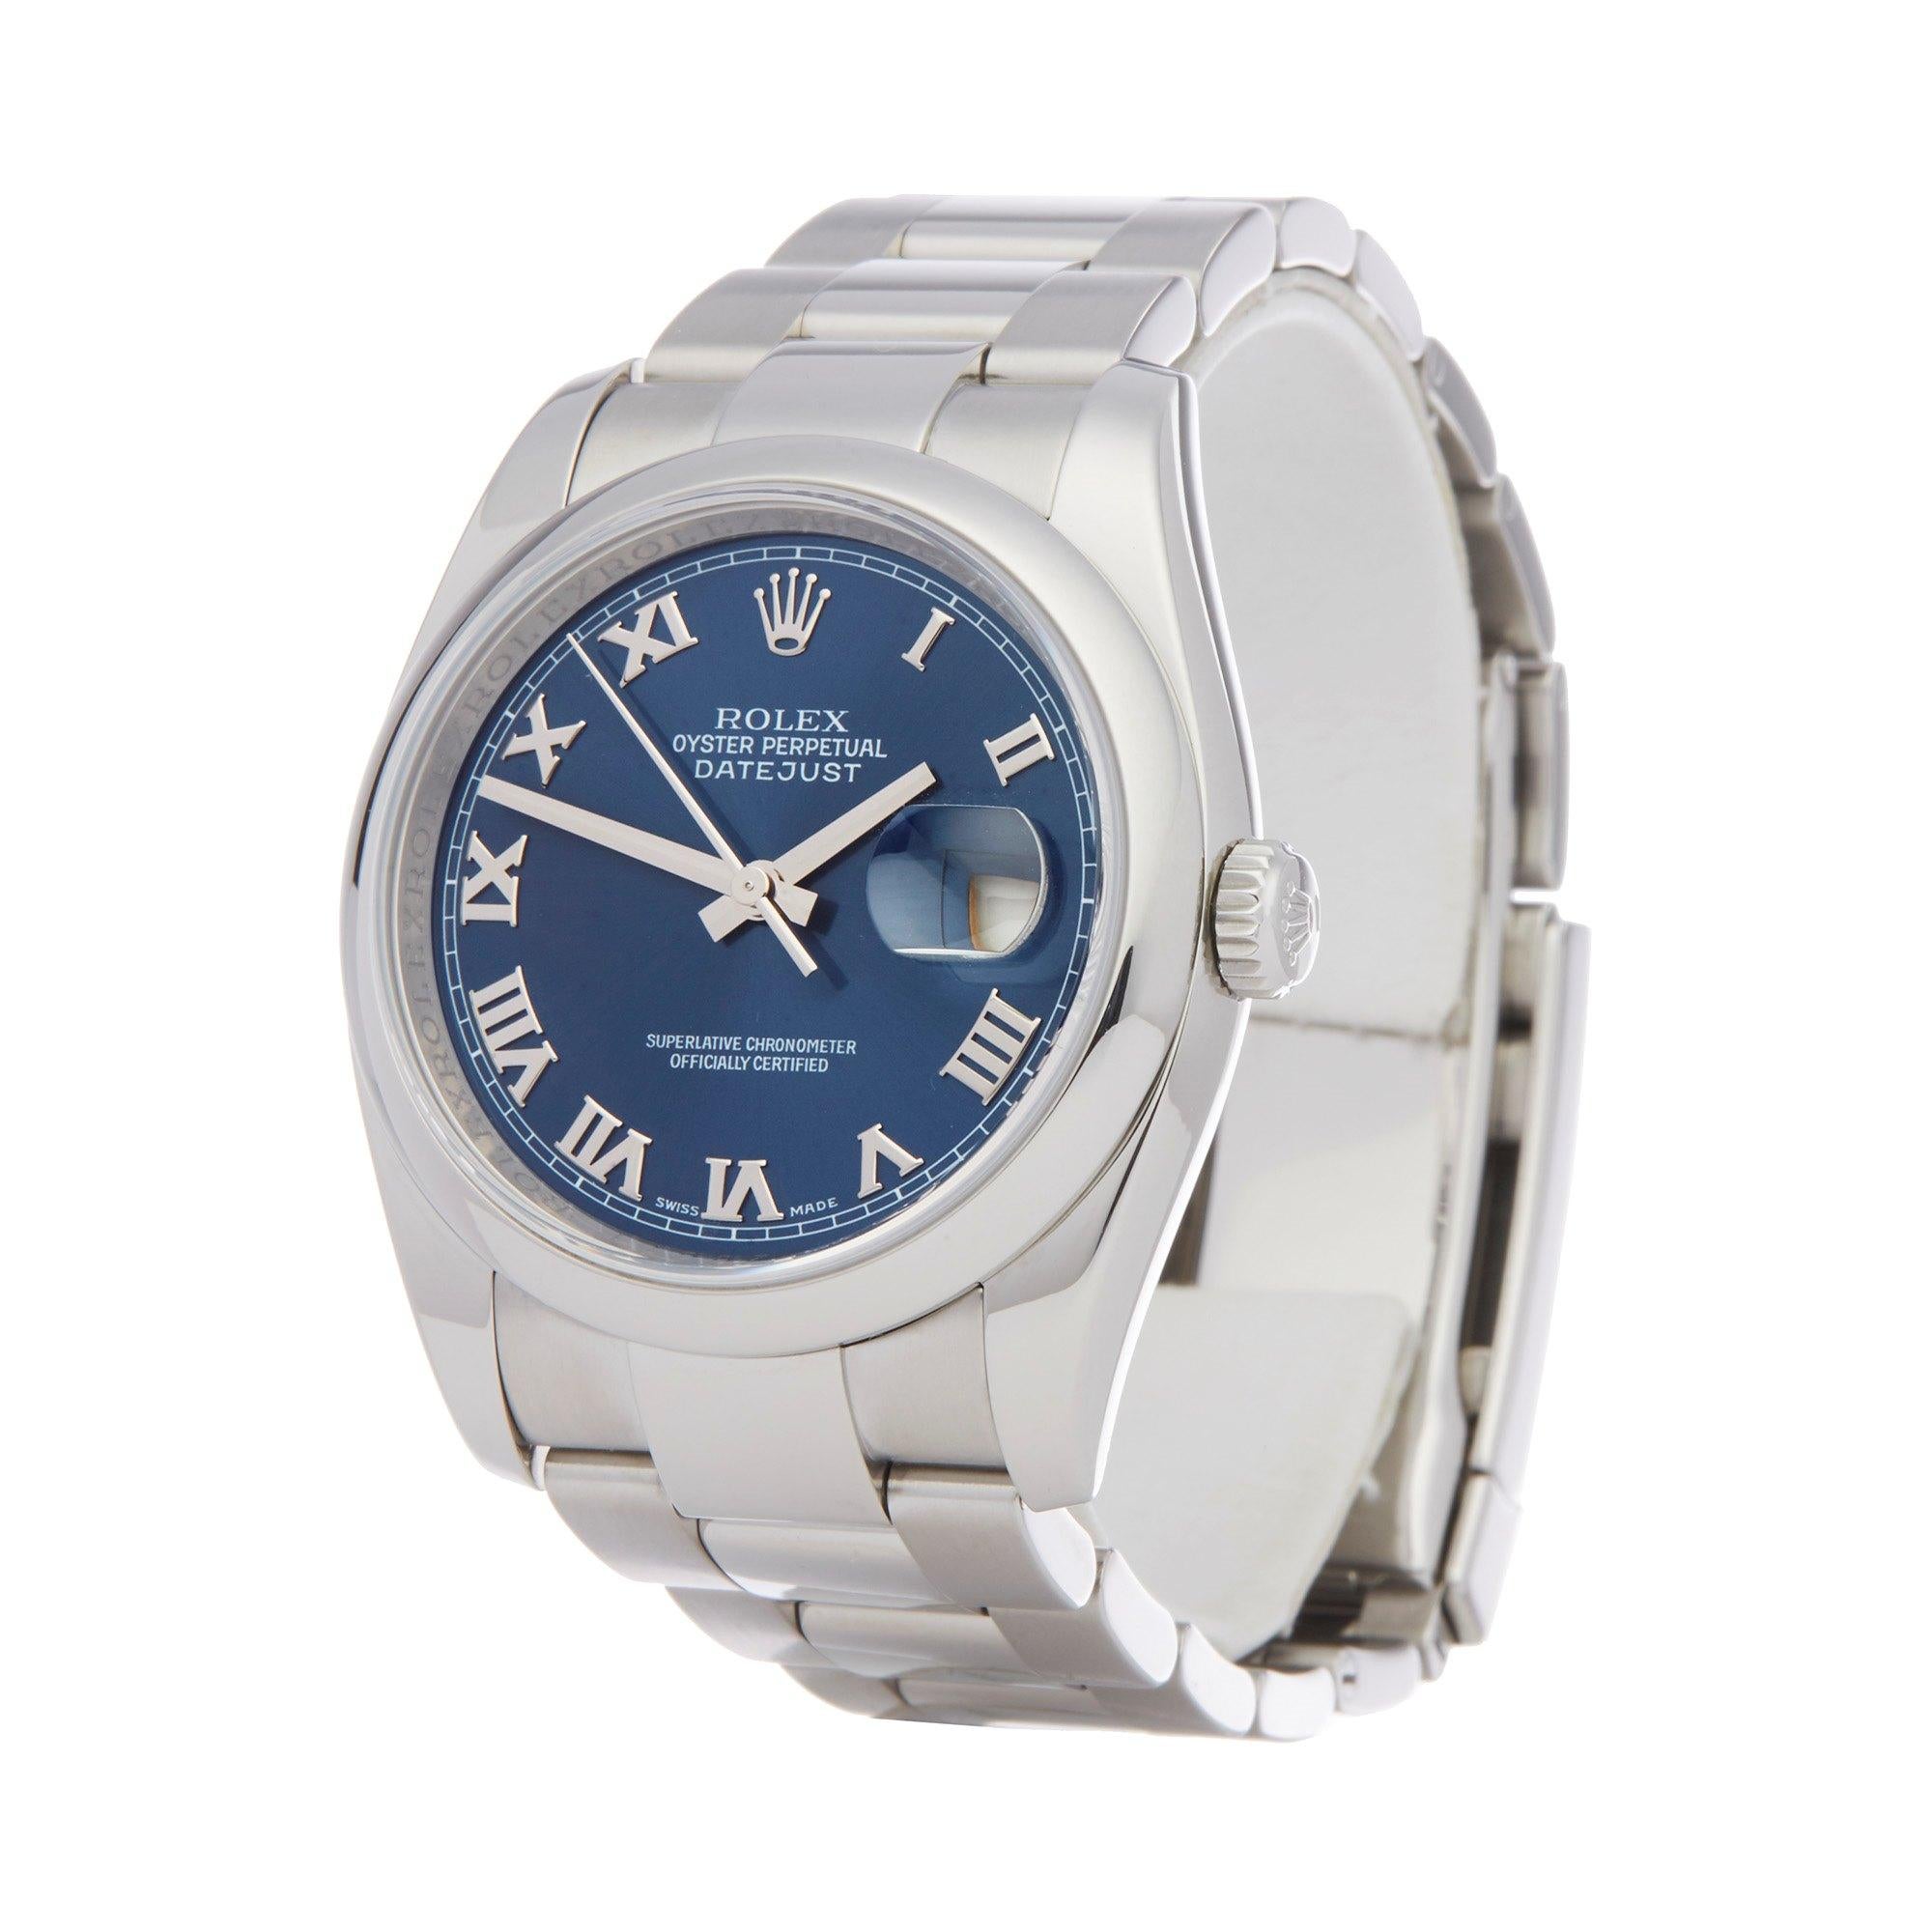 Xupes Reference: W007412
Manufacturer: Rolex
Model: Datejust
Model Variant: 36
Model Number: 116200
Age: 2007
Gender: Men
Complete With: Rolex Box
Dial: Blue Roman
Glass: Sapphire Crystal
Case Size: 36mm
Case Material: Stainless Steel
Strap